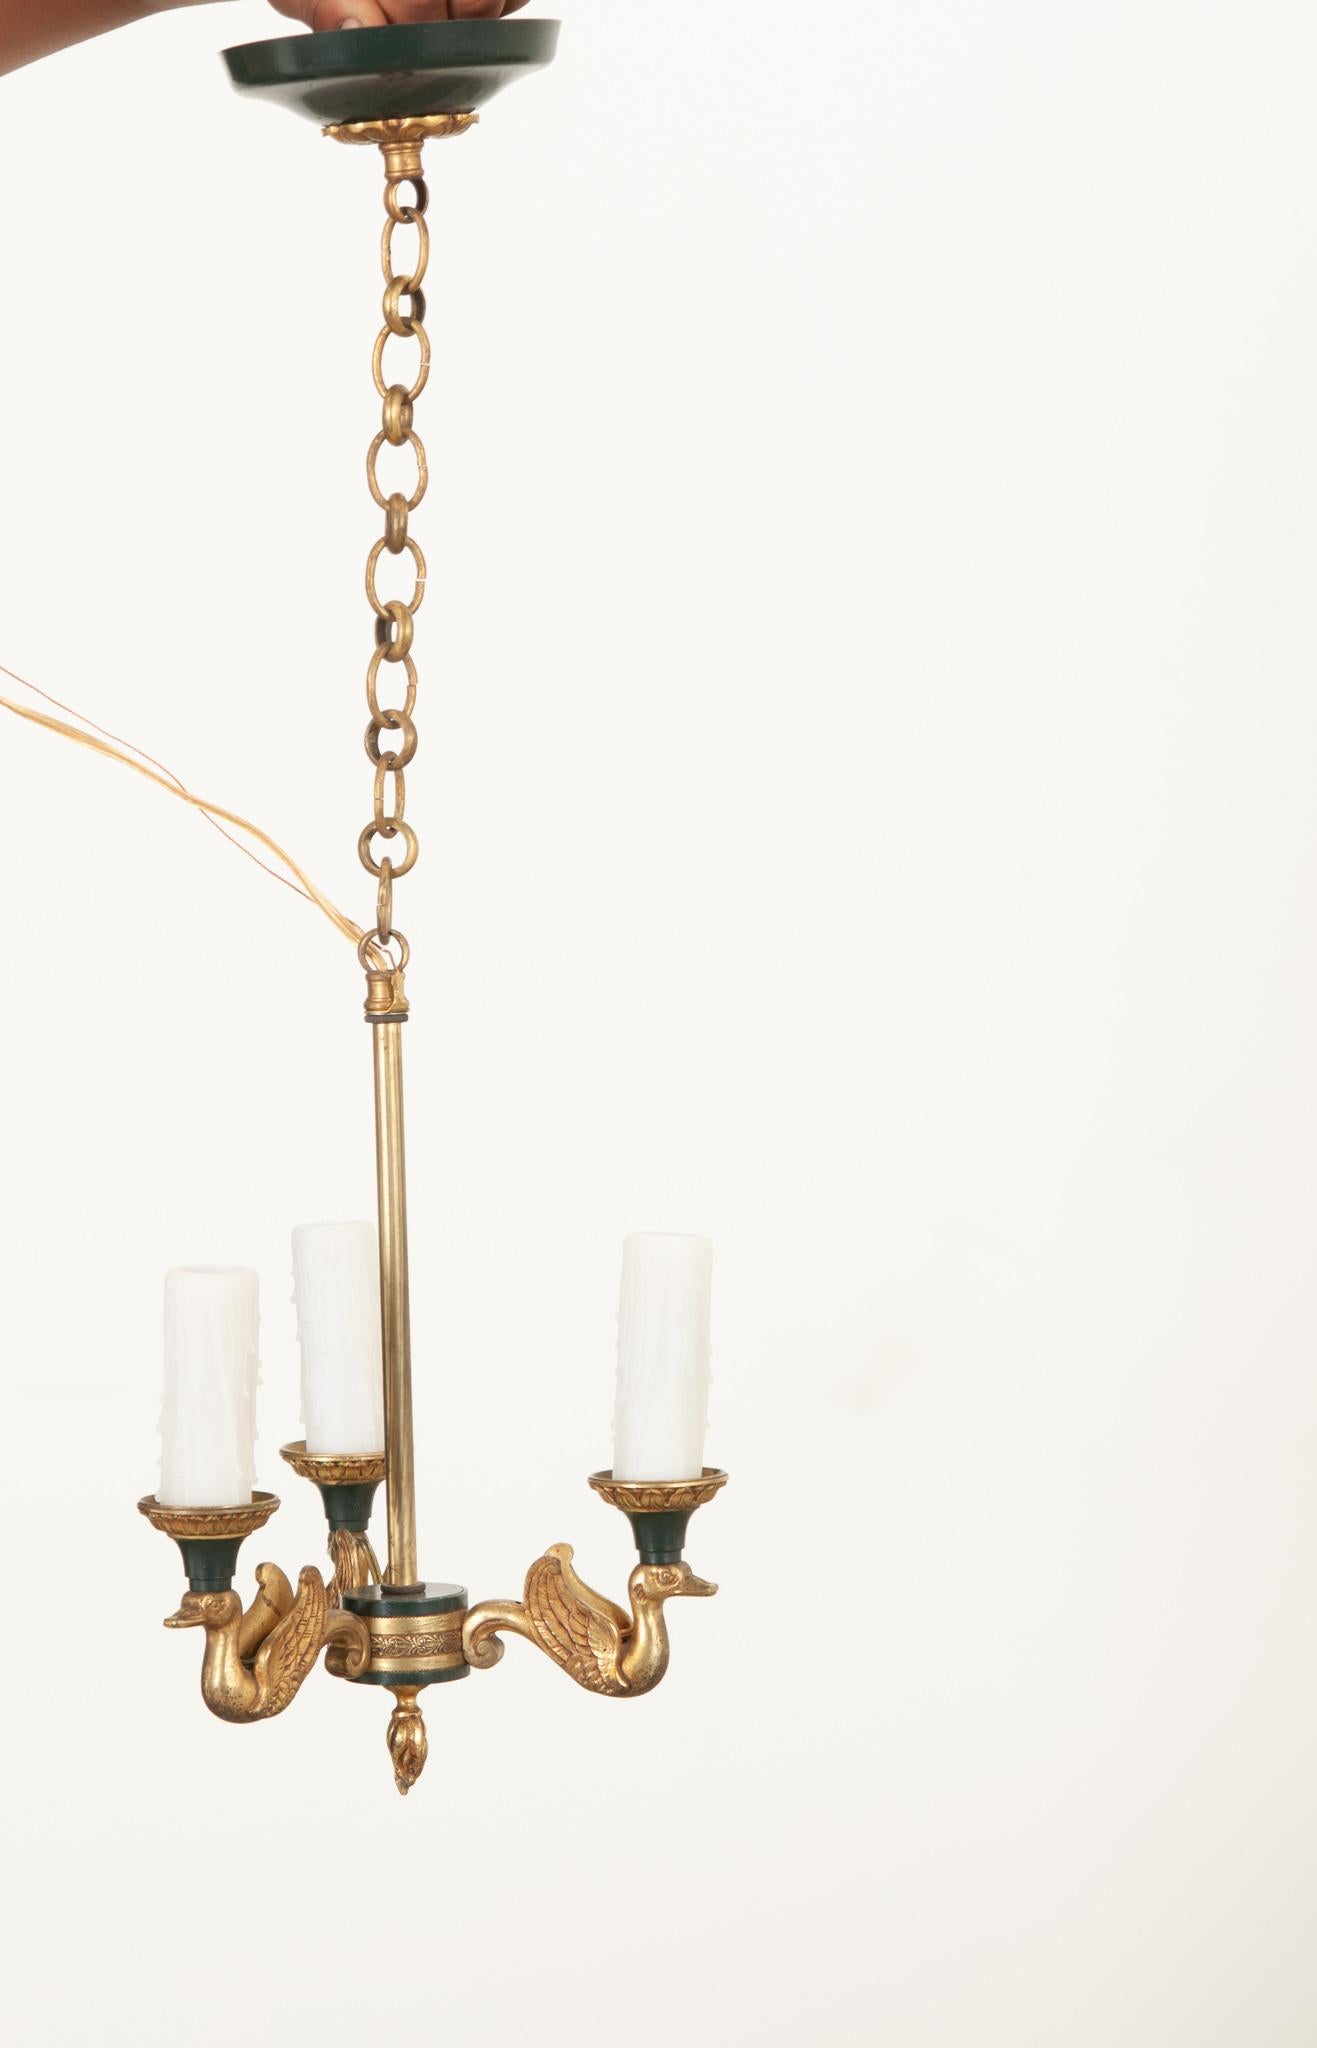 This darling petite Empire style chandelier is just the fixture your space needs to elevate it to the next level. Cast brass swans support three arms and attach seamlessly to a decorative brass and bronze center ring. White, faux melting candle